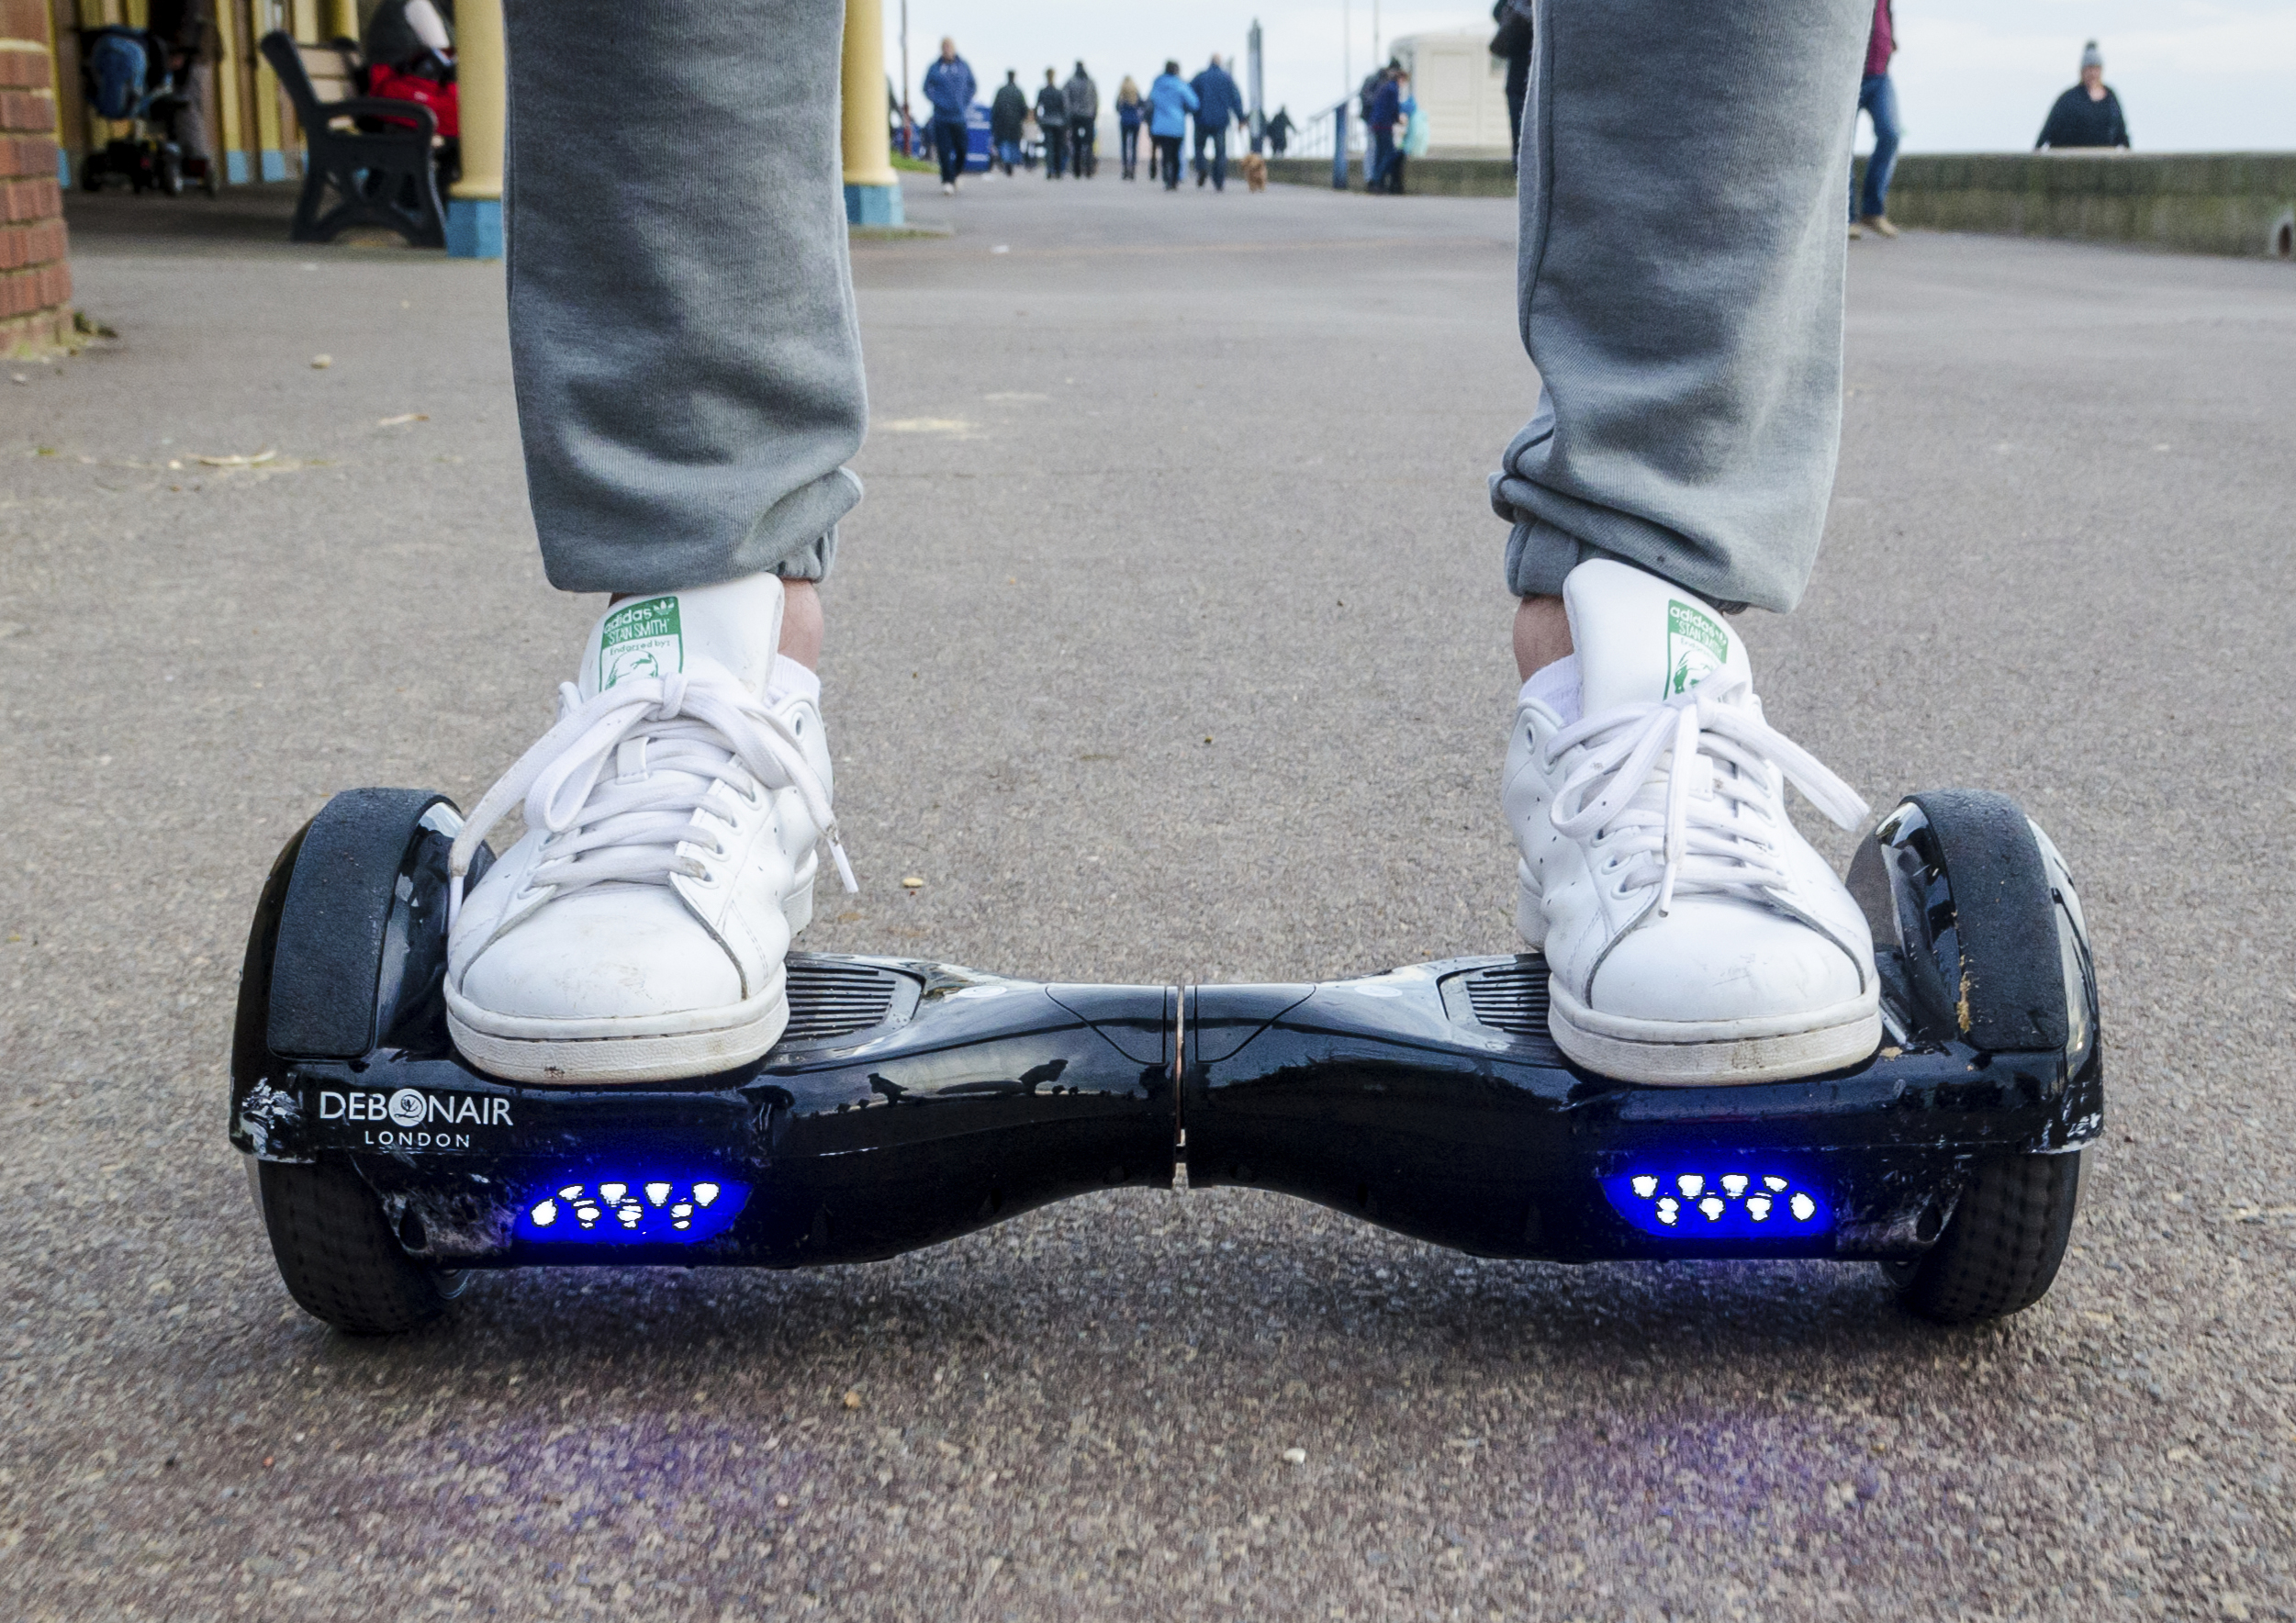 Hoverboard Owners Encouraged to Keep Devices Campus | News Center